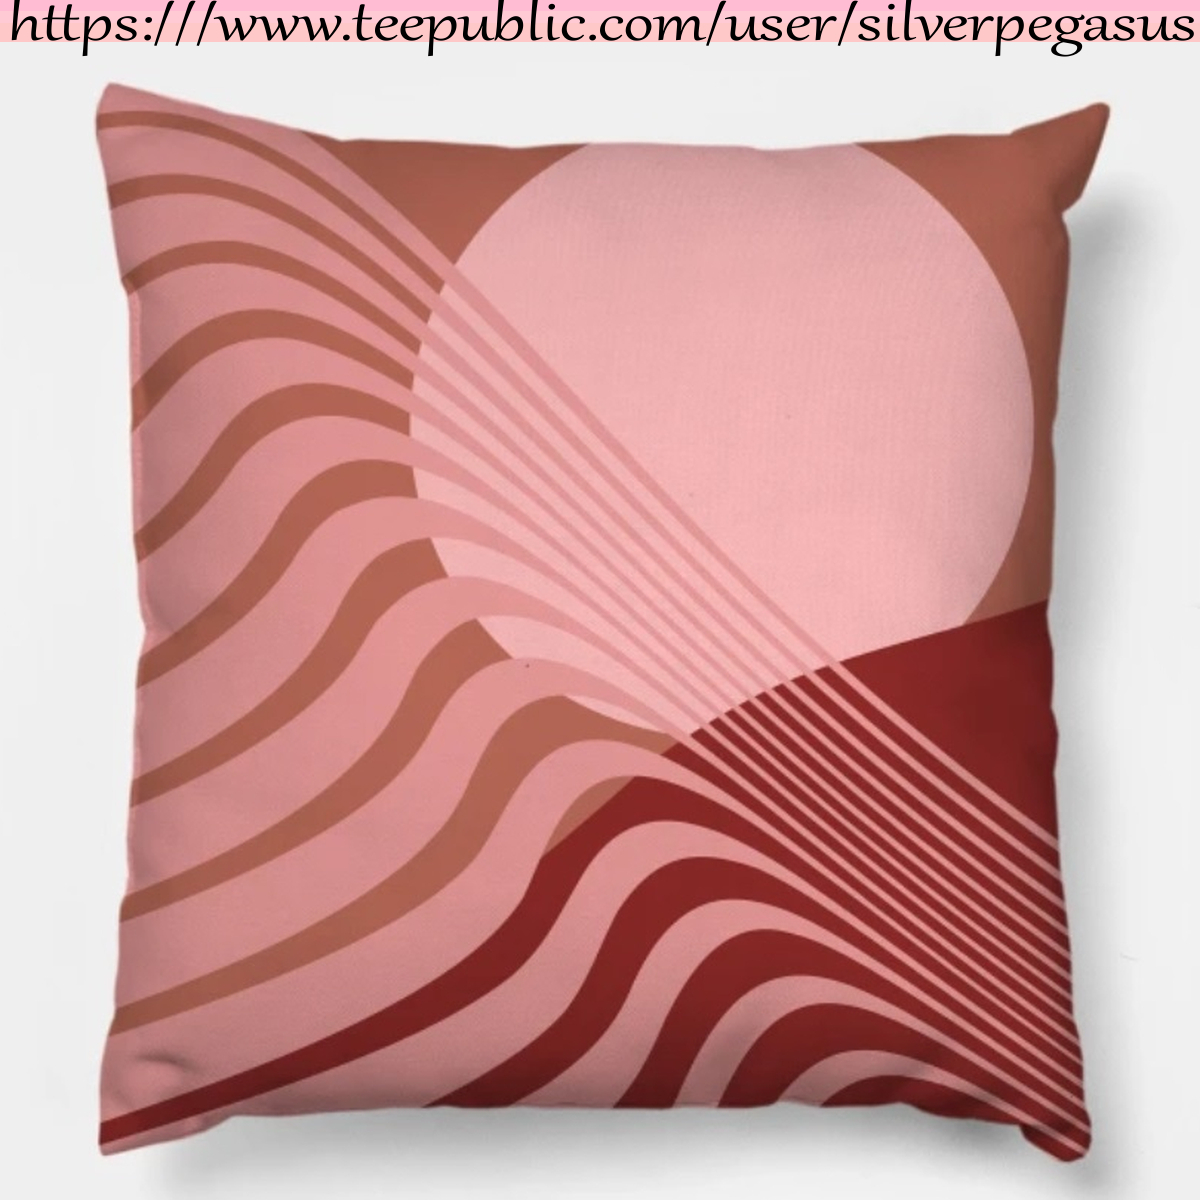 Trendy Retro Style Minimal Abstract Landscape Accent Pillow by SilverPegasus  🌄💖  Available in 4 sizes
More colors in our shop

#pillows #throwpillow #accentpillow #homedecor #homeaccents #modernpillows

Beyond The Fog - Bronze Maroon Pillow
Shop👉 teepublic.com/throw-pillow/3…